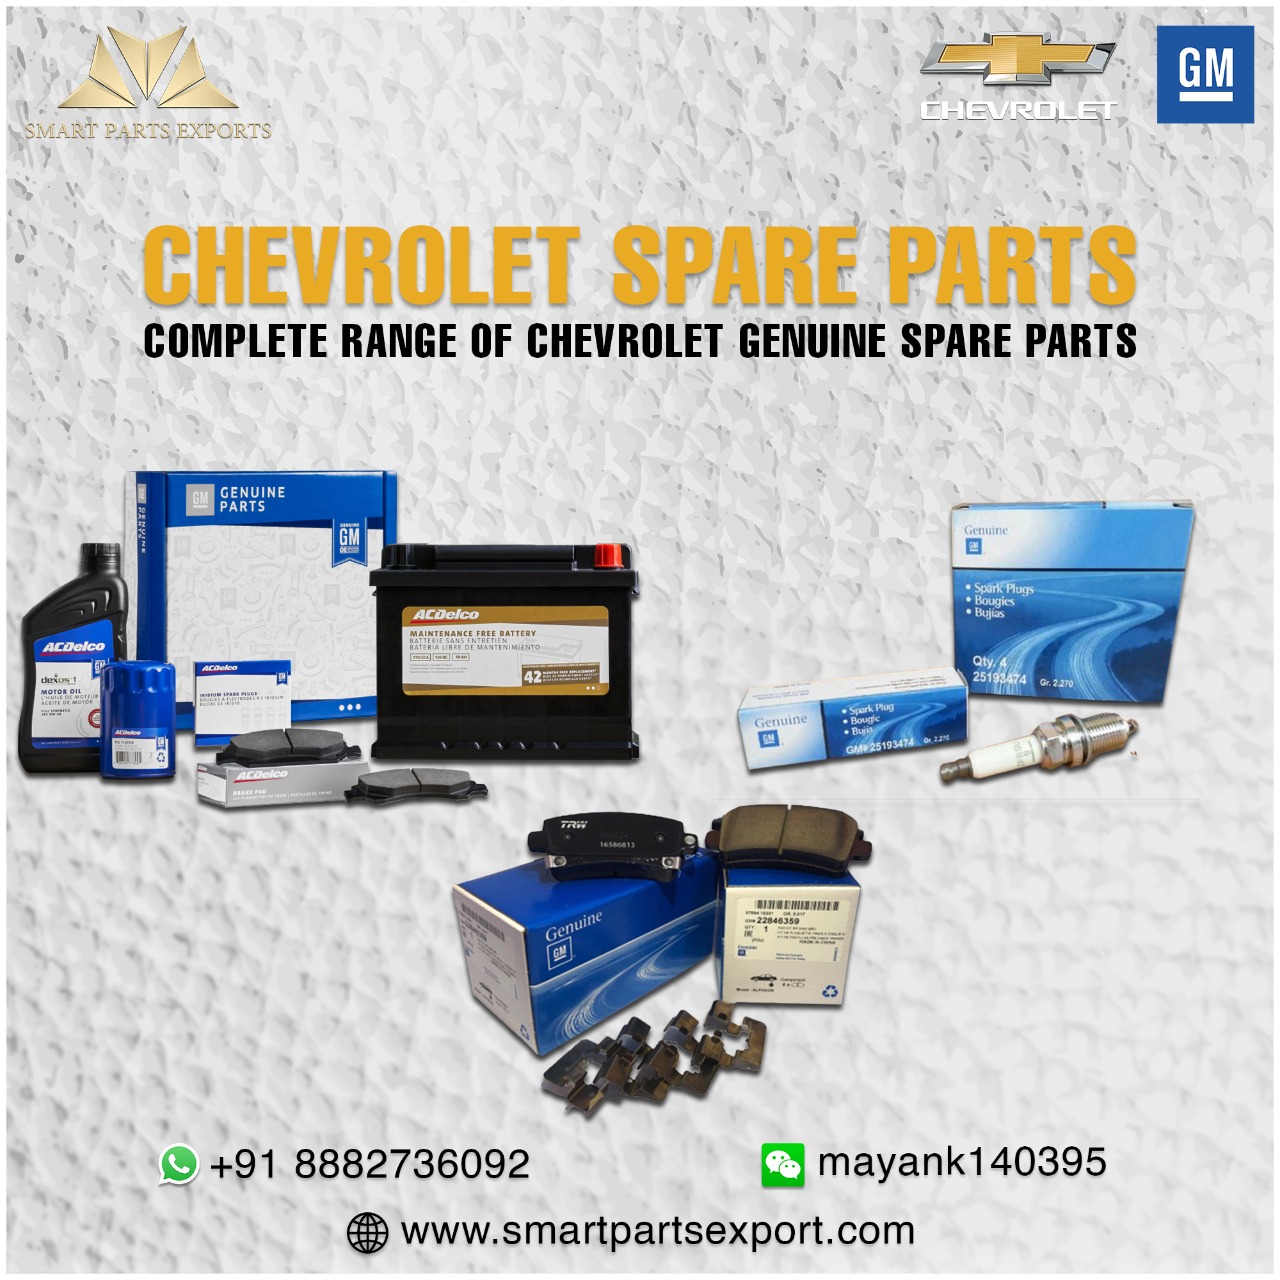 Chevrolet Genuine Parts in Ethiopia from Smart Parts Exports